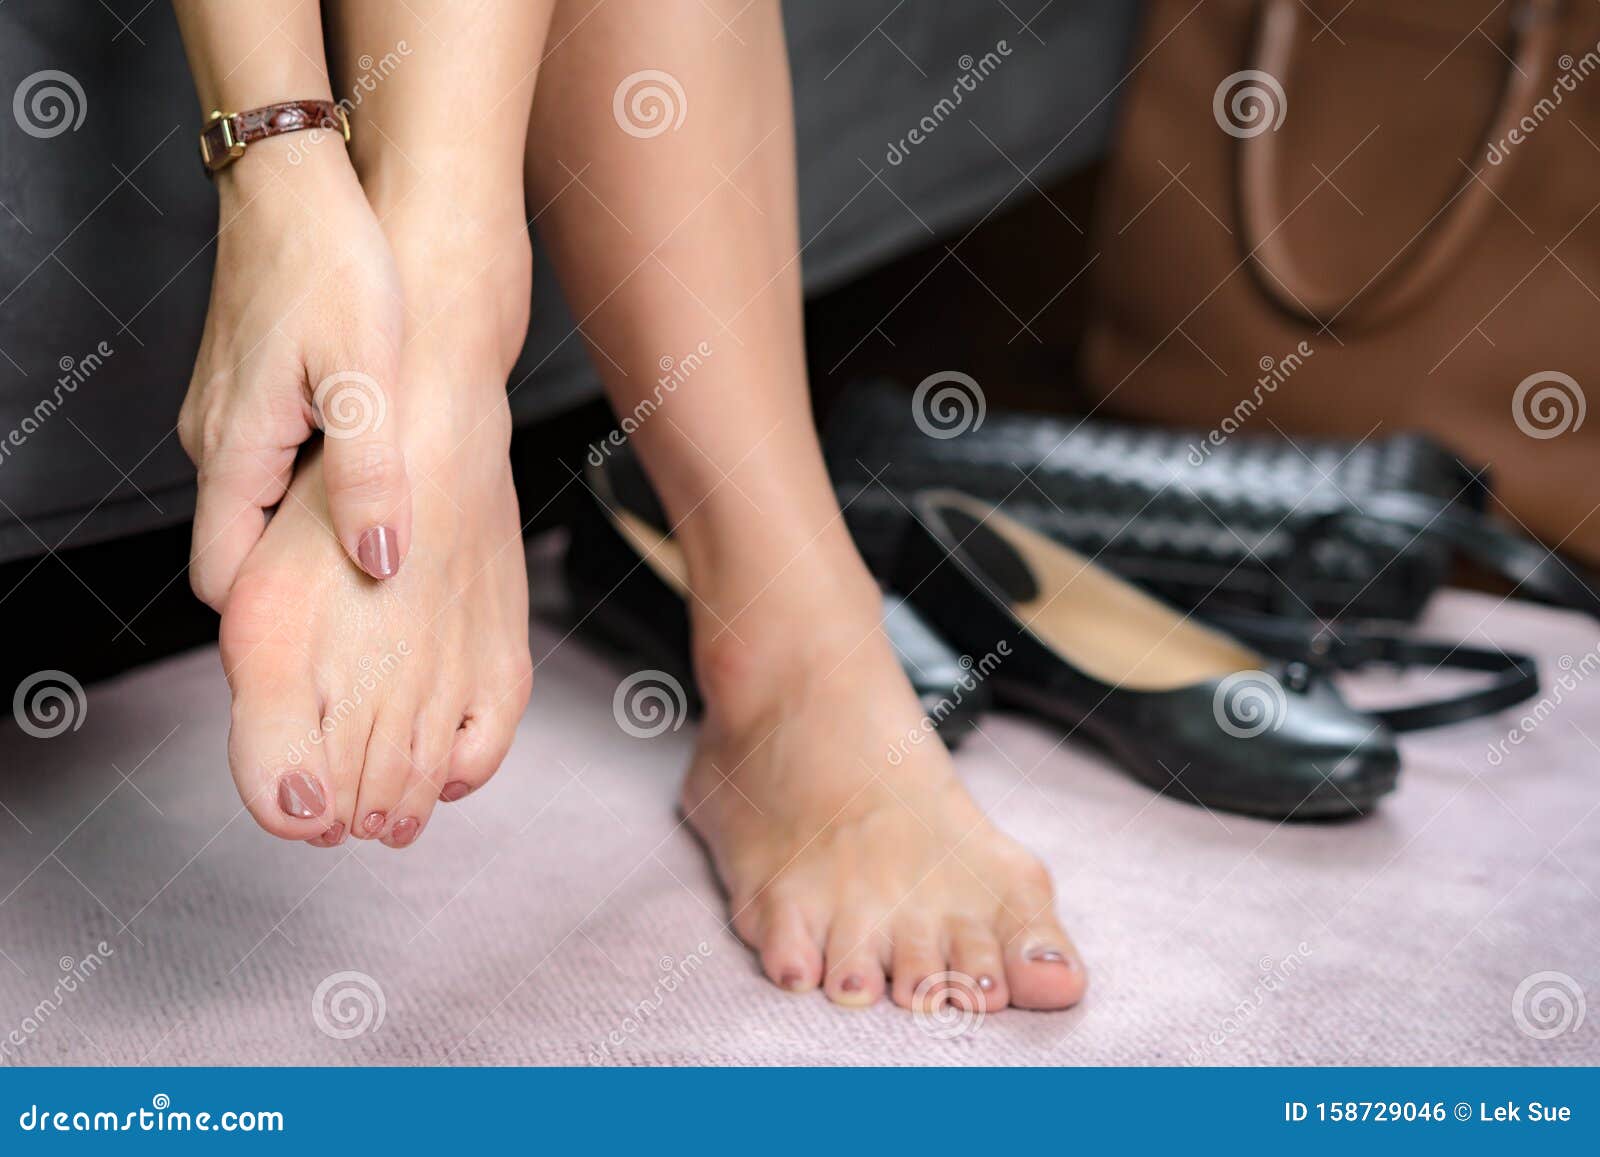 bare feet of working woman, she touching her toes to release pain